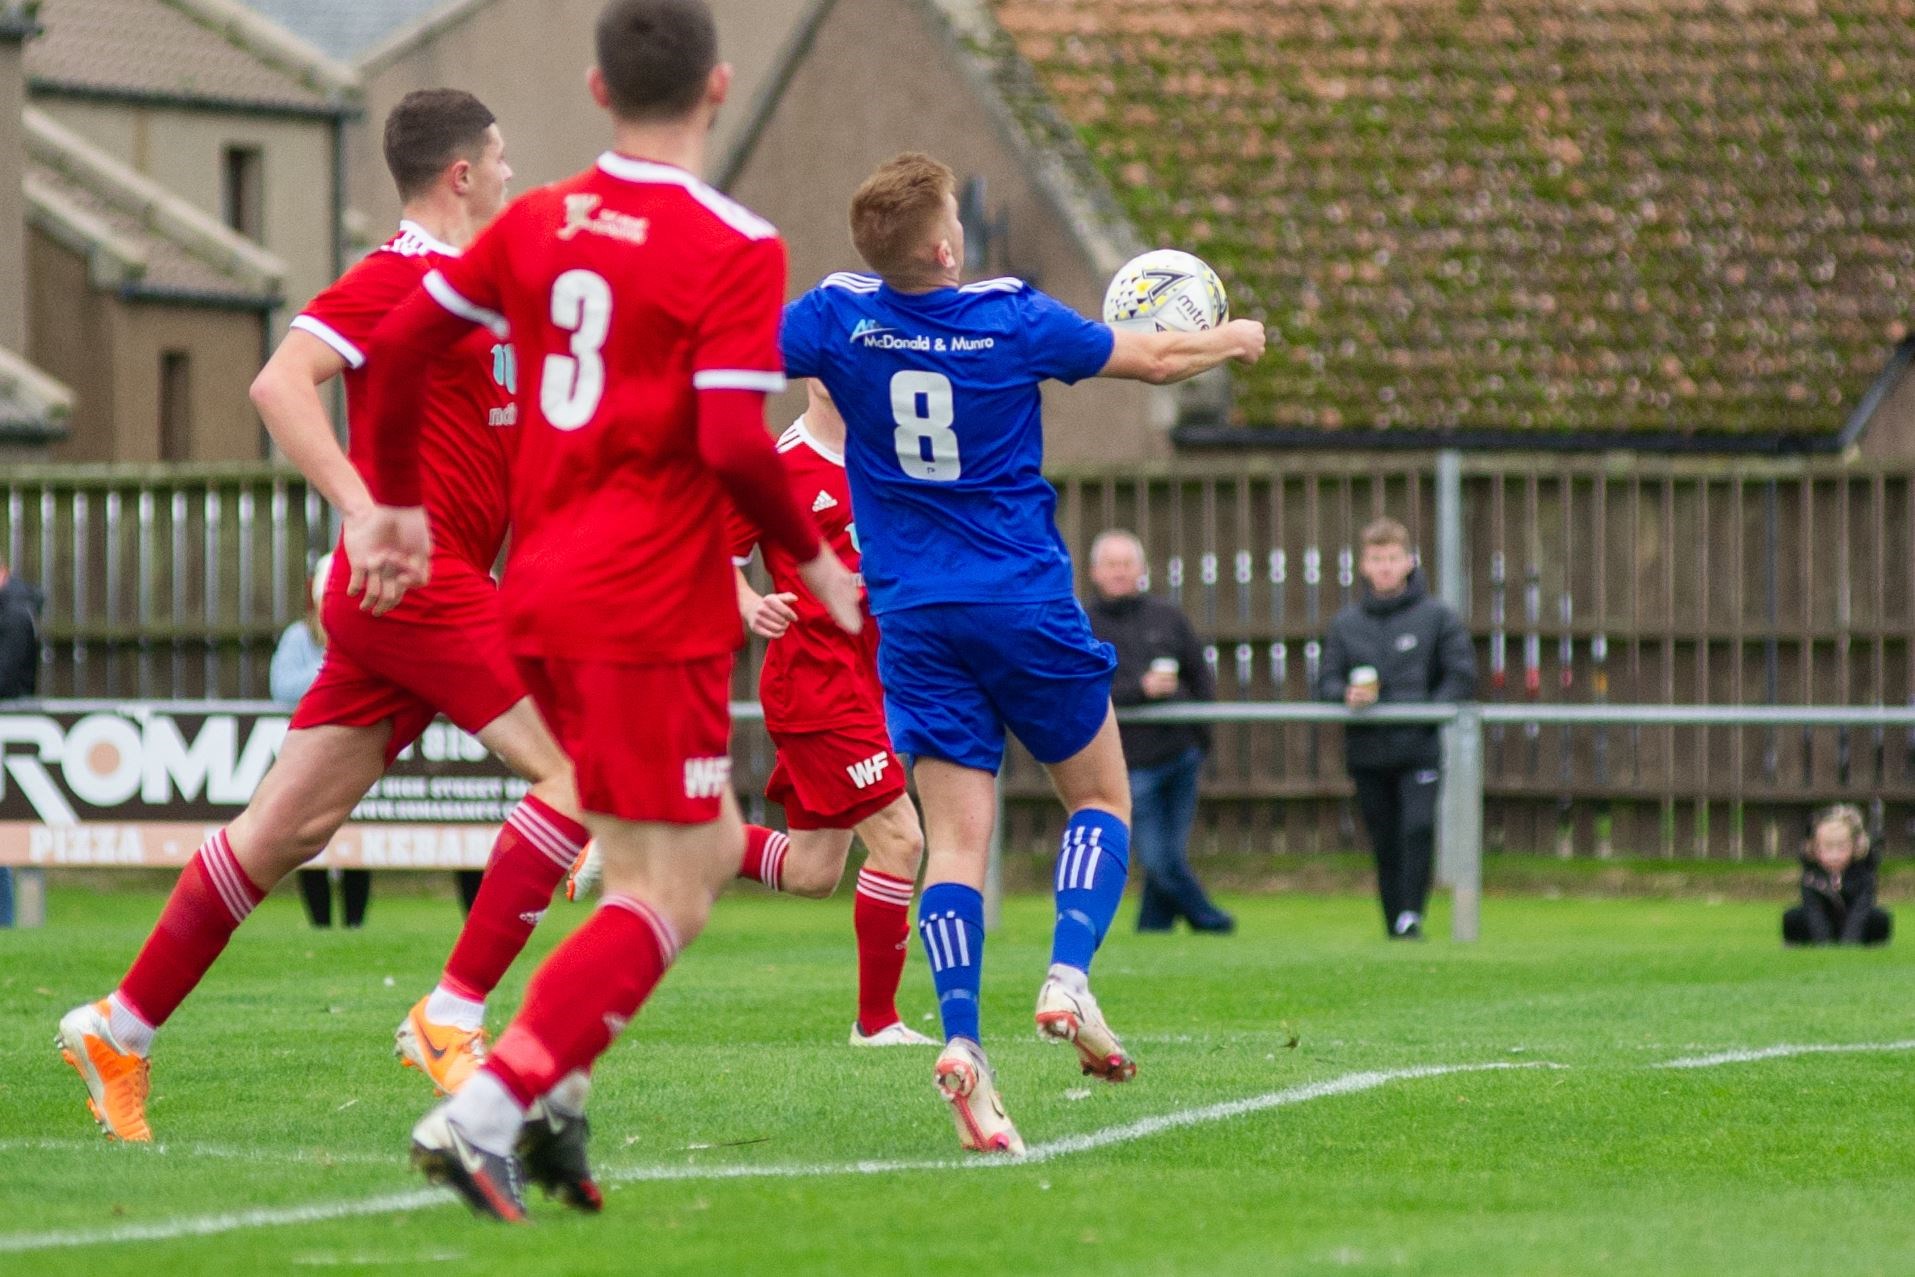 A hand ball infringement ruled out this goal from Lossiemouth's Ryan Sewell. ..Deveronvale FC (6) vs Lossiemouth FC (0) - Highland Football League - Princess Royal Park, Banff 23/10/2021...Picture: Daniel Forsyth..